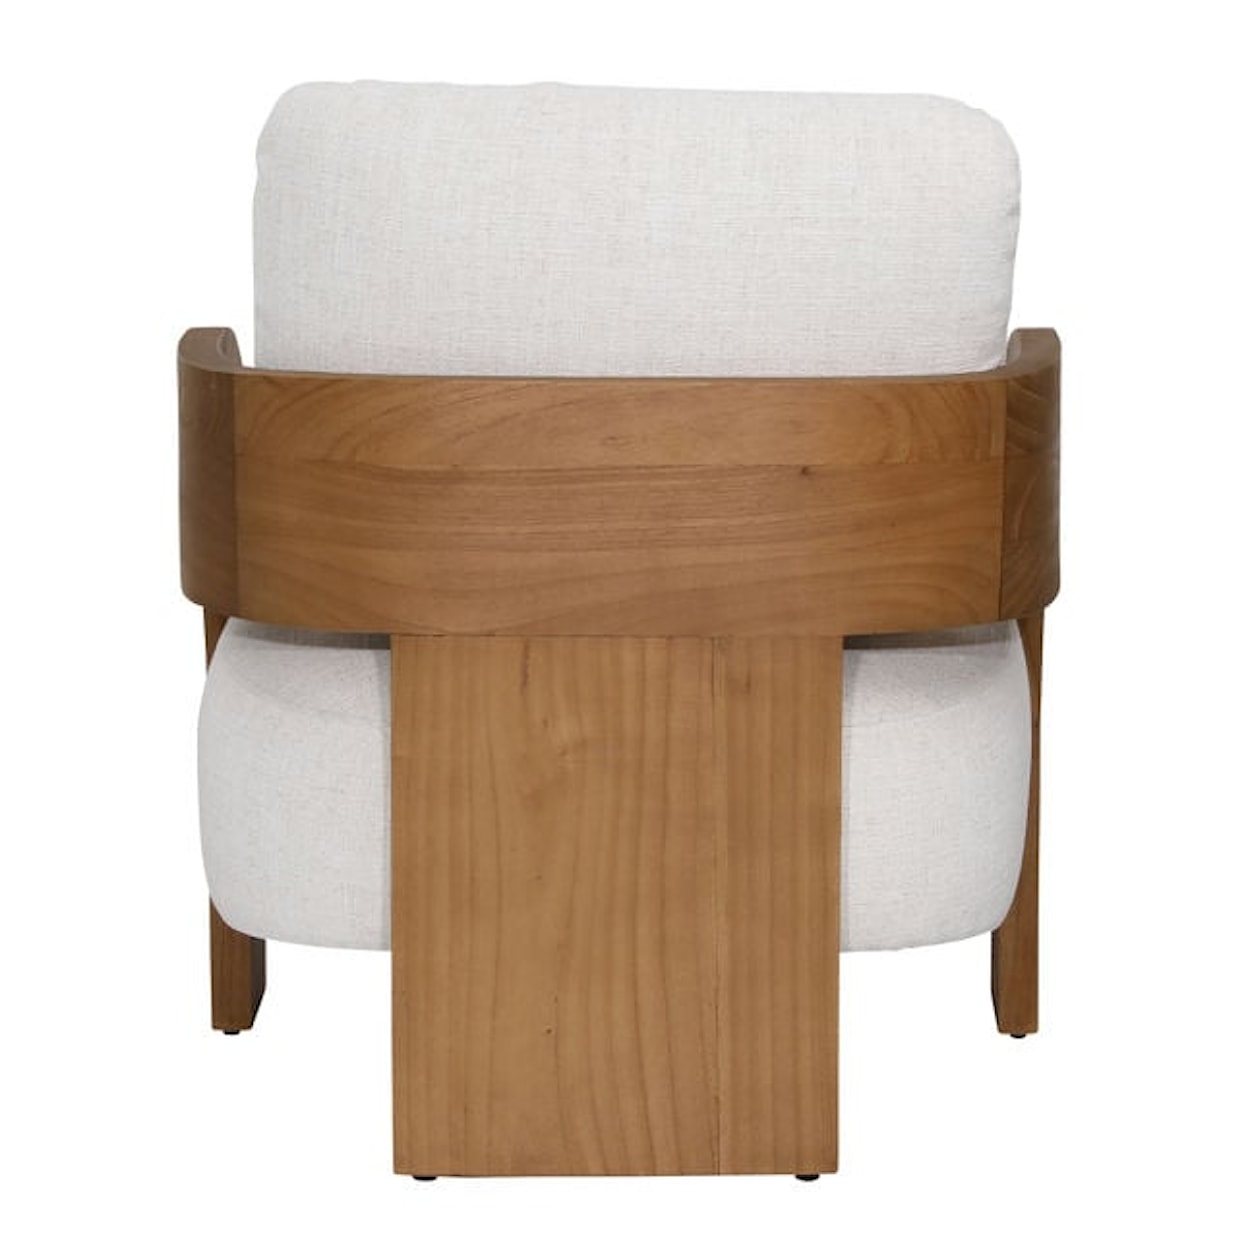 Dovetail Furniture Dovetail Accessories Maravi Occasional Chair